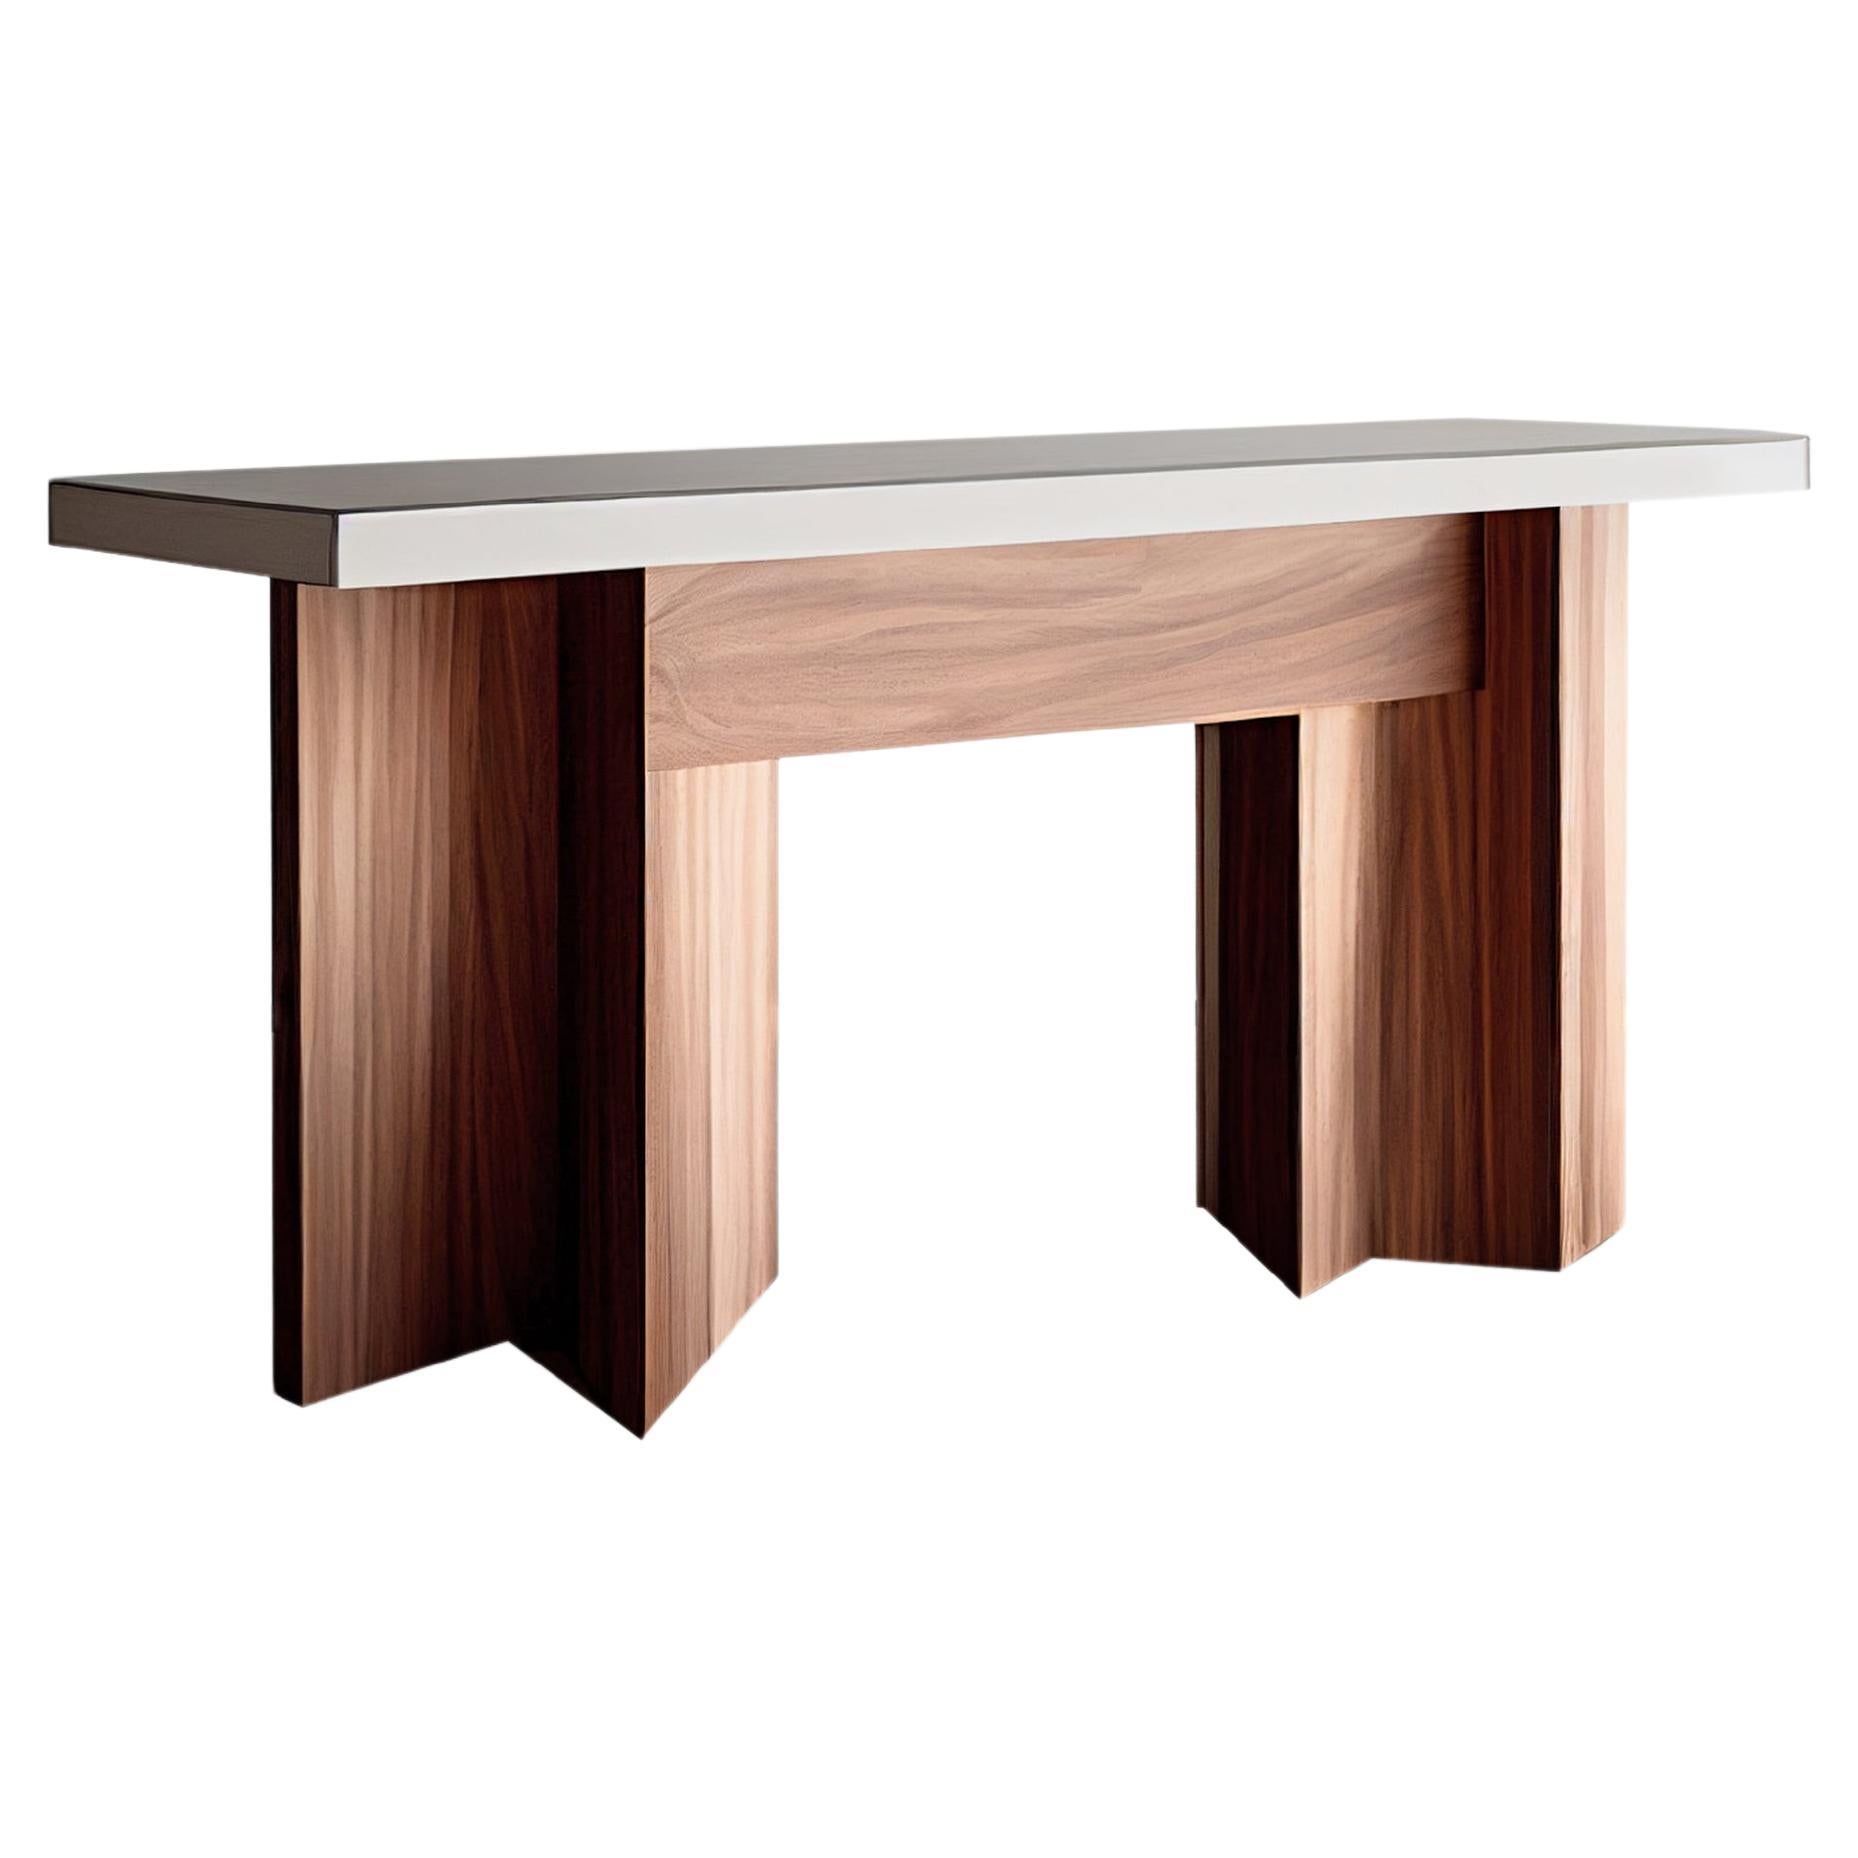 Console Table, Sideboard Made of Solid Walnut Wood, Narrow Console by Nono